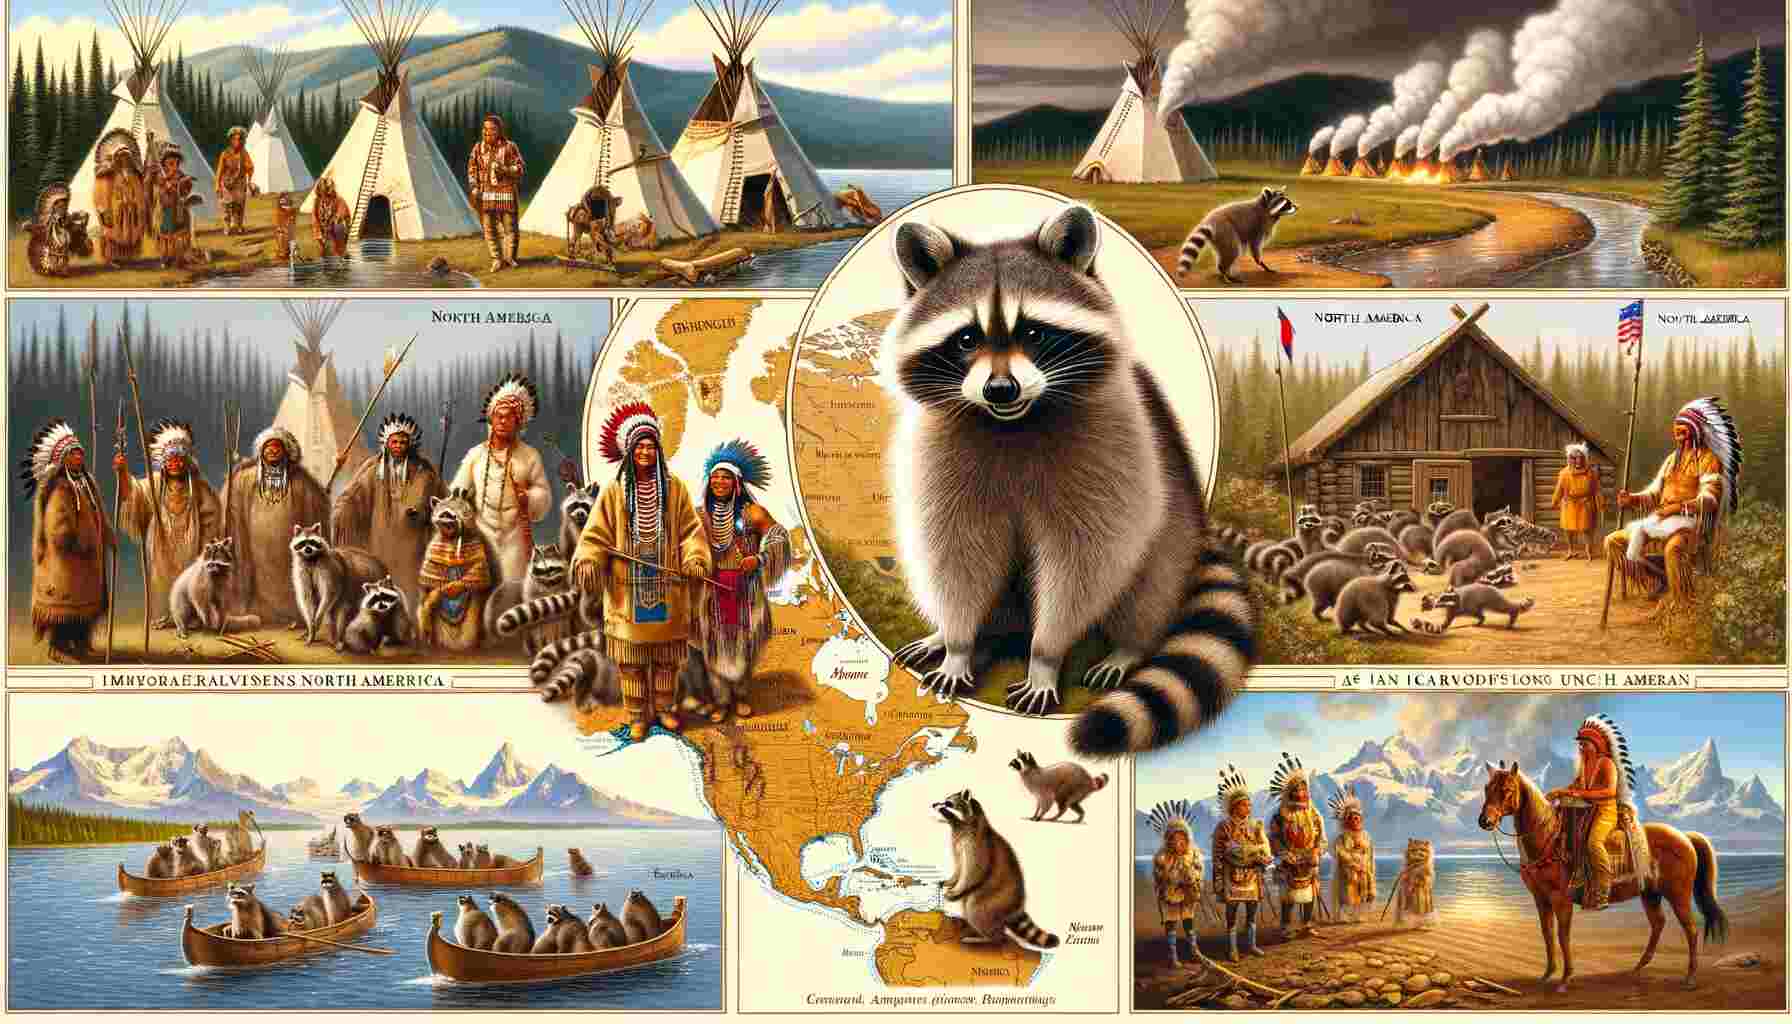 Here is the illustration depicting the historical background of raccoons. It shows raccoons in North America interacting with Native American tribes and their introduction to Europe and Asia, symbolizing their spread beyond North America and interactions with different human cultures.